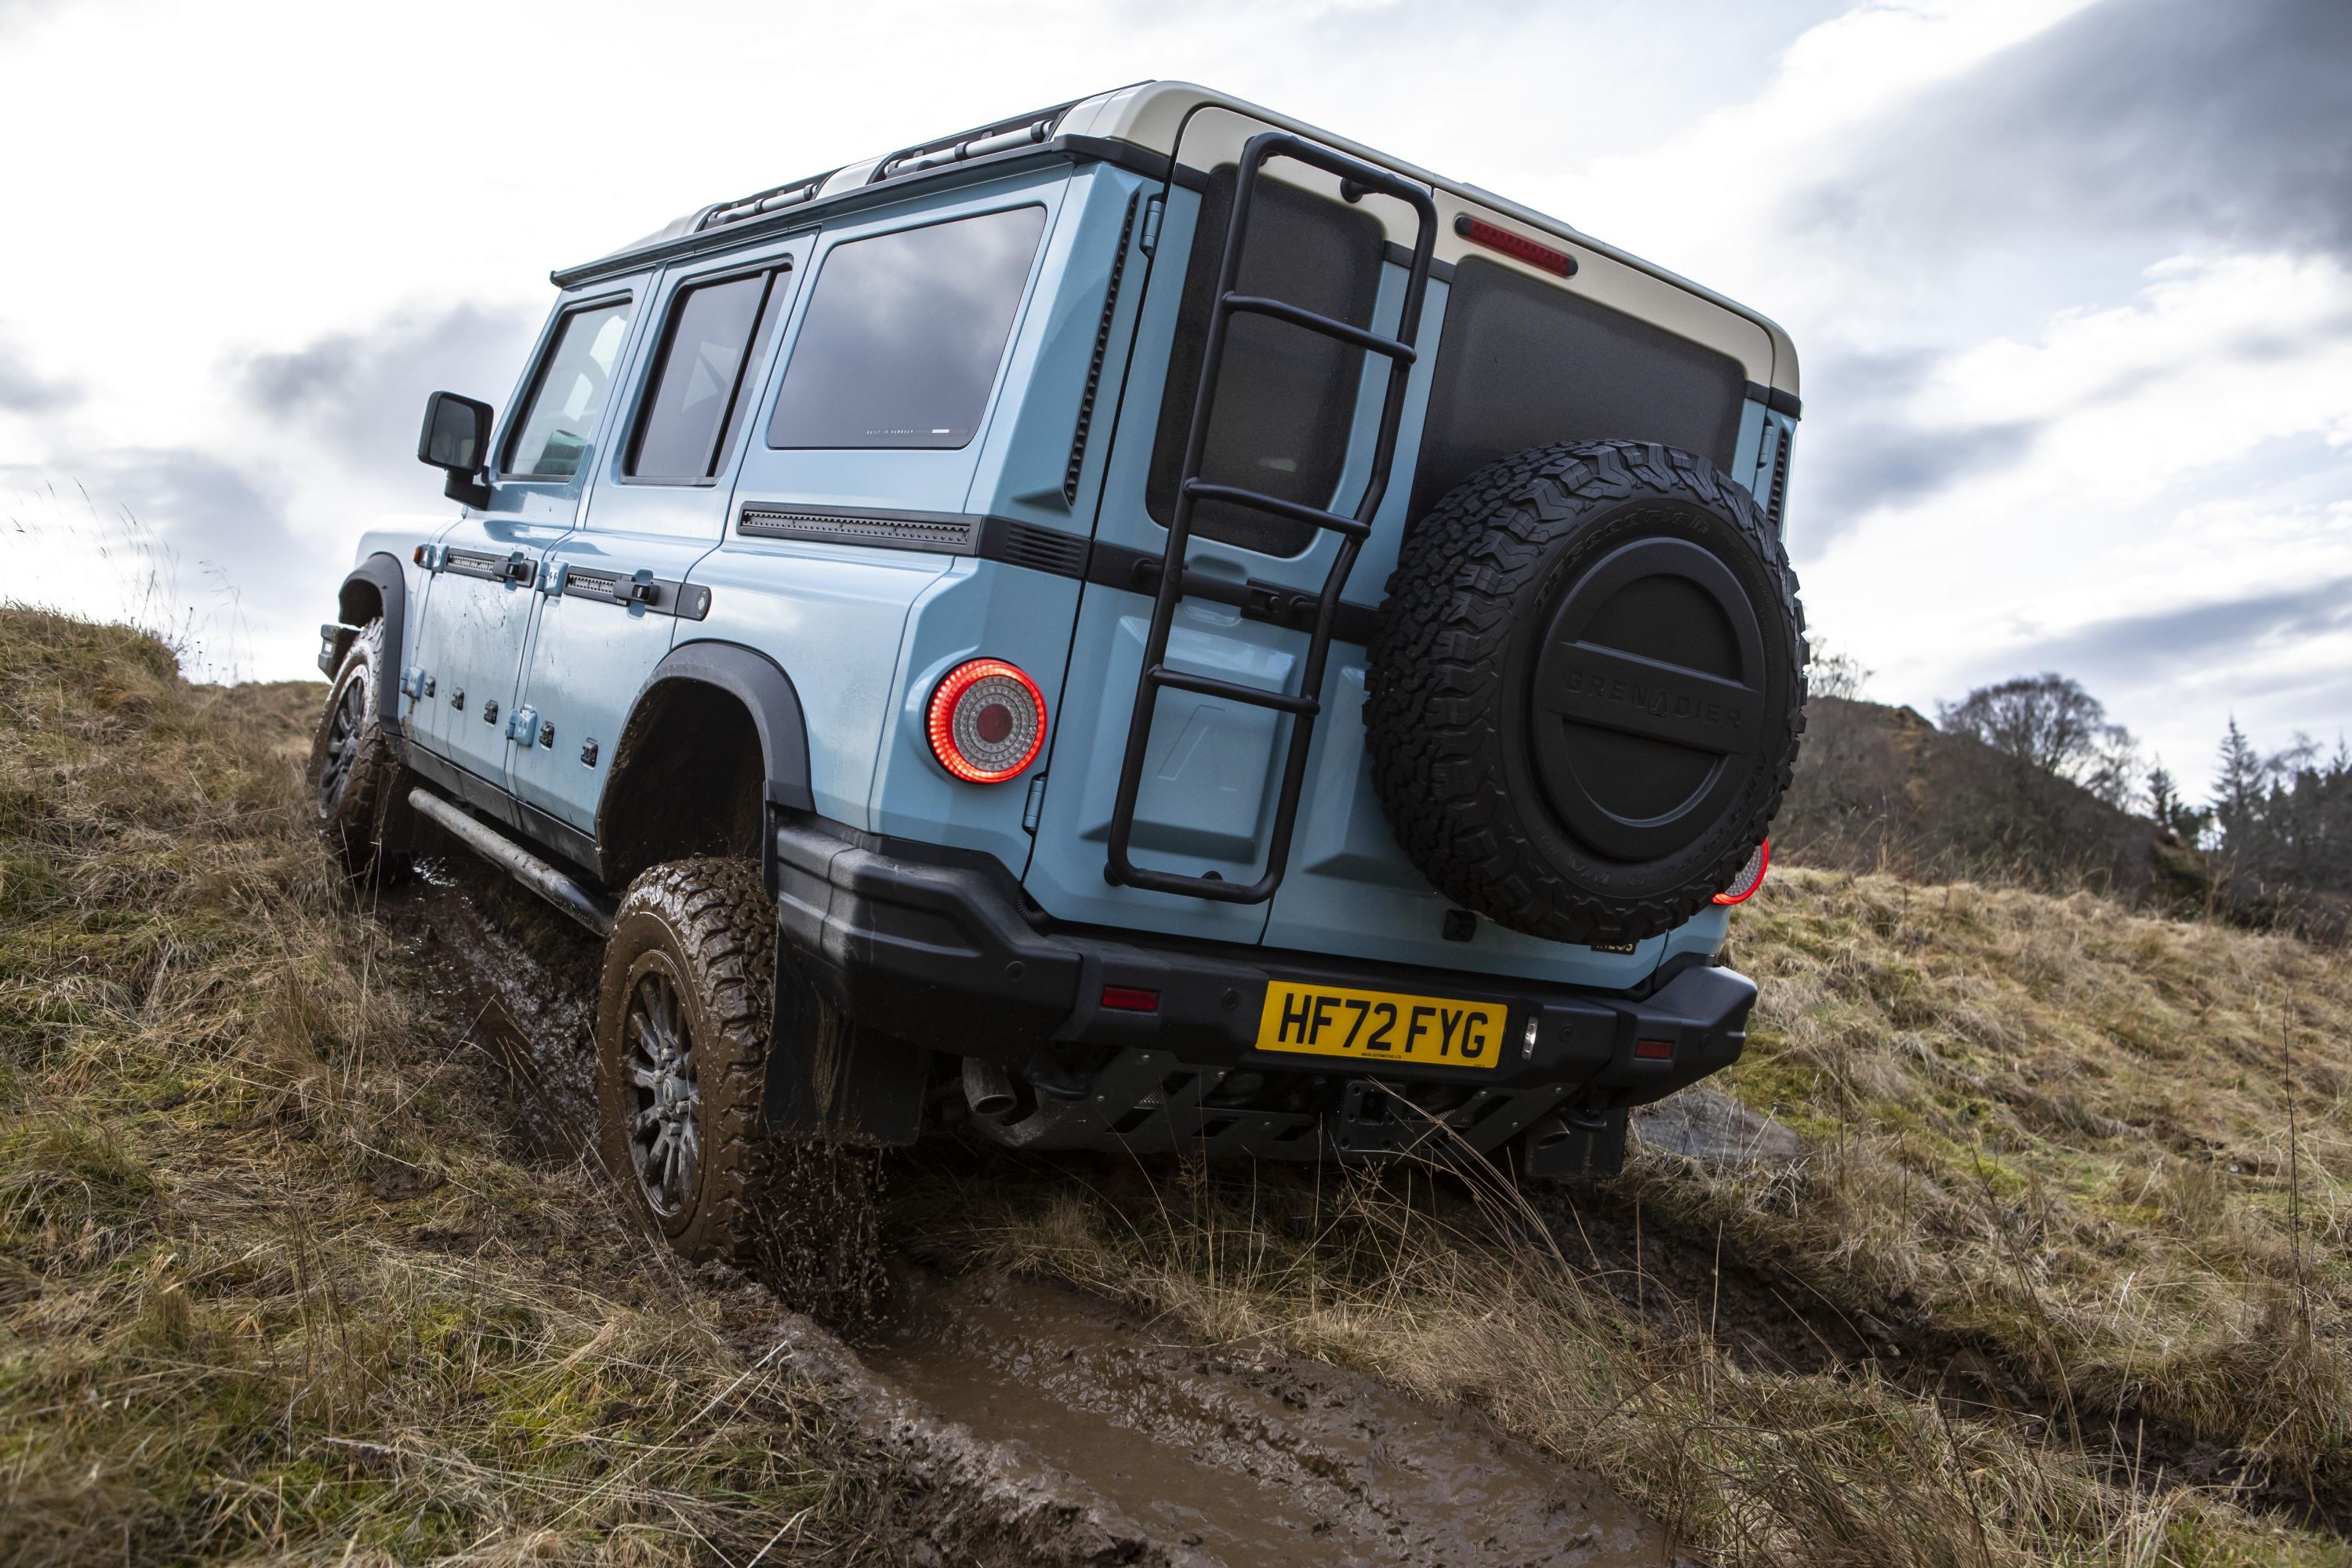 2023 Ineos Grenadier Prototype Review: Maybe Think Twice About That Wrangler